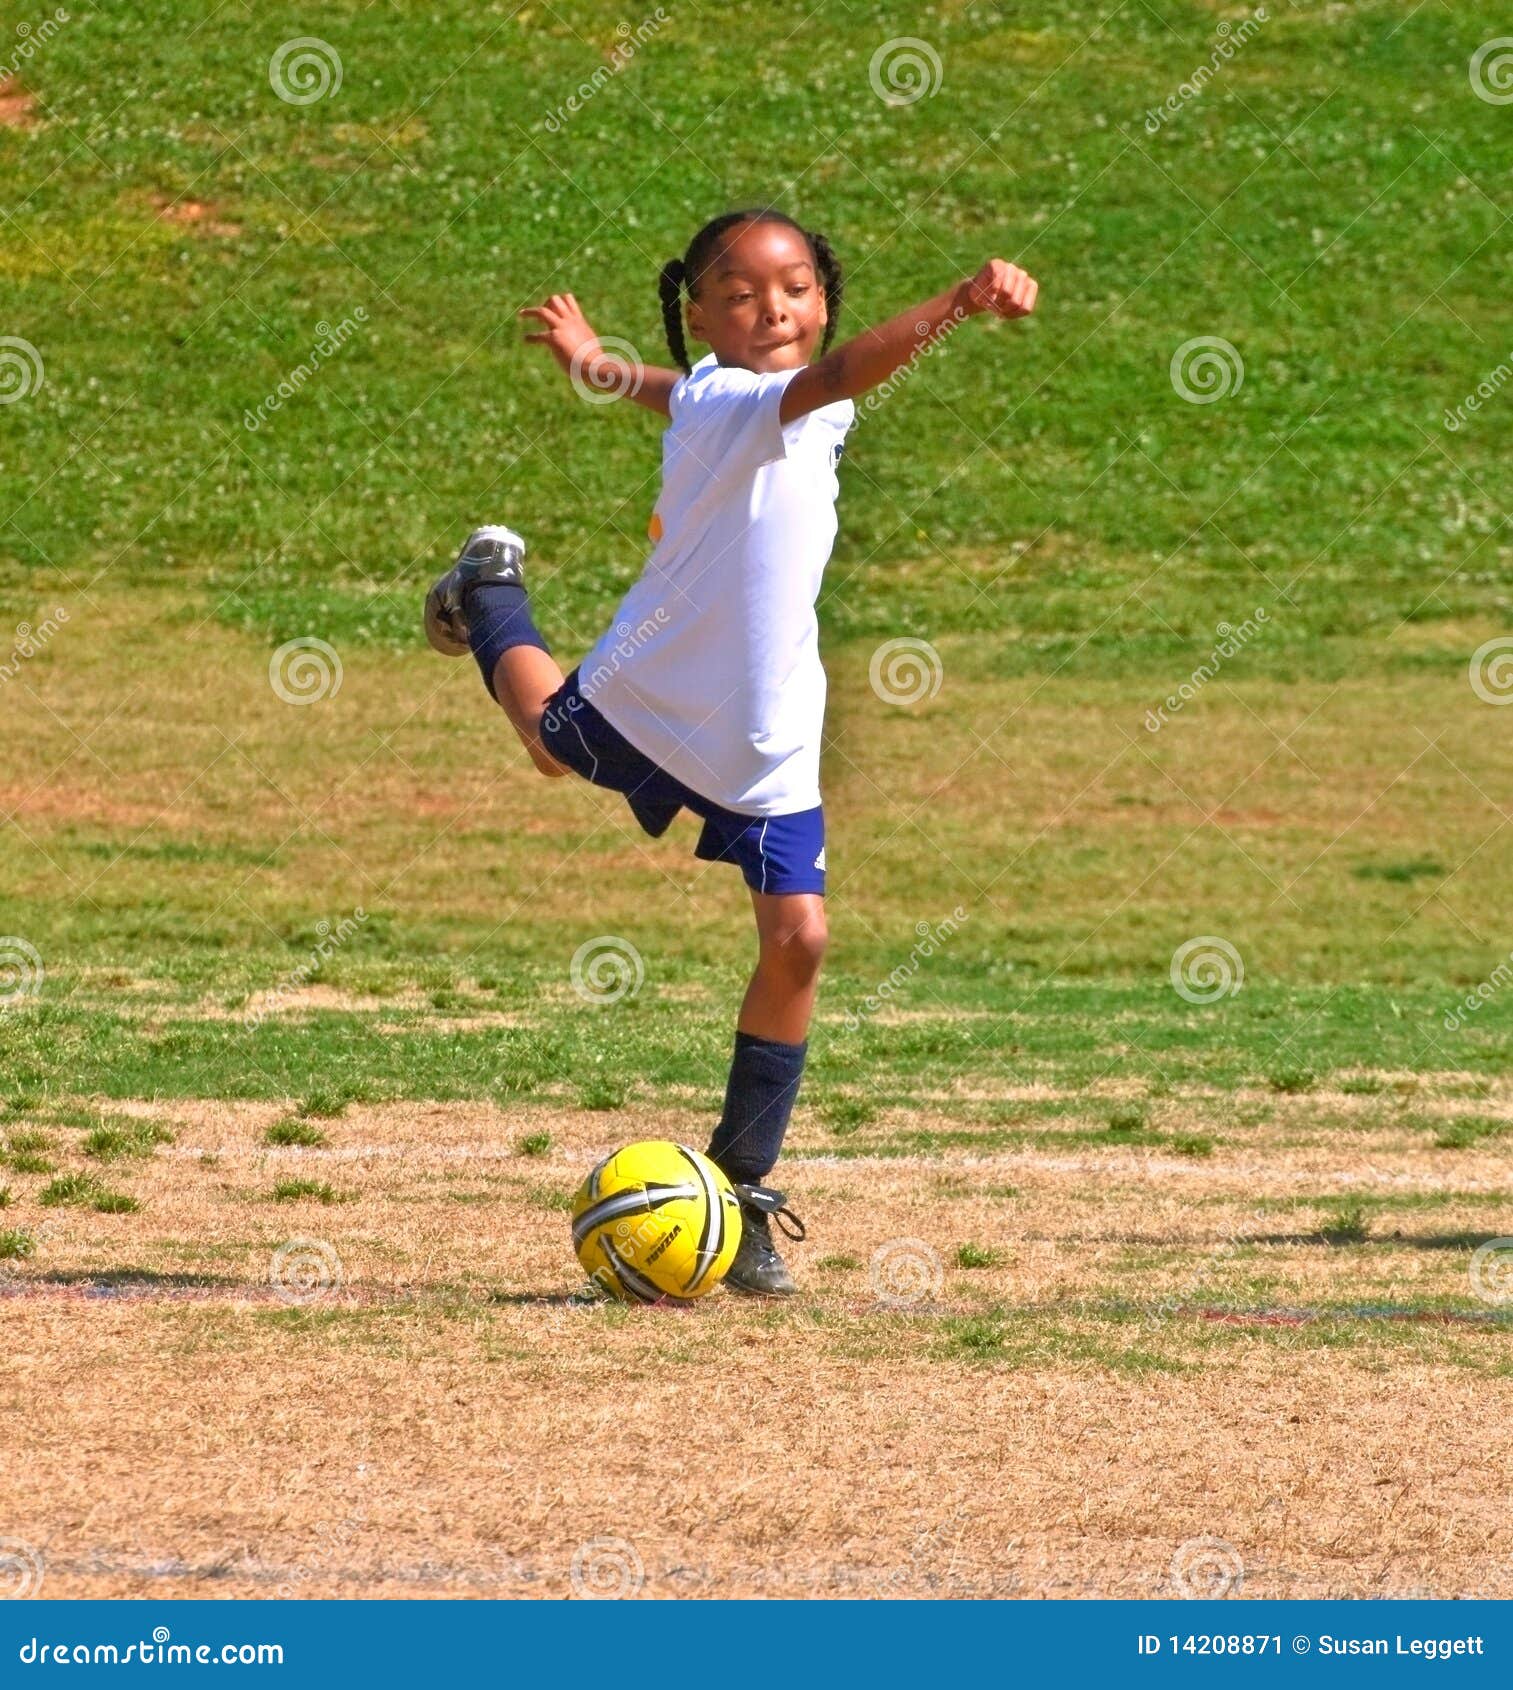 During the game, a soccer player kicked the ball